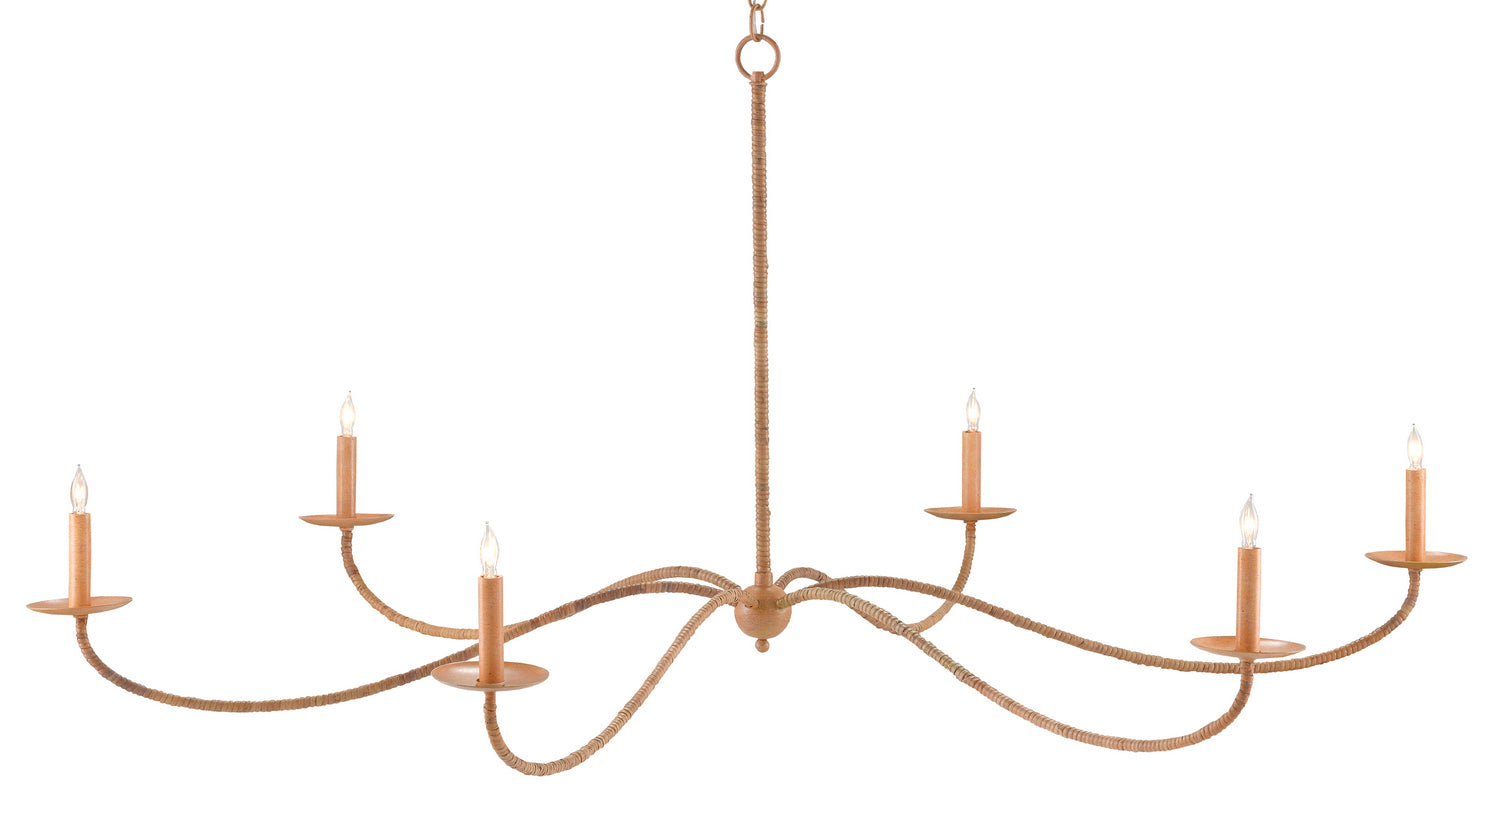 Six Light Chandelier from the Saxon collection in Saddle Tan/Natural Rattan finish